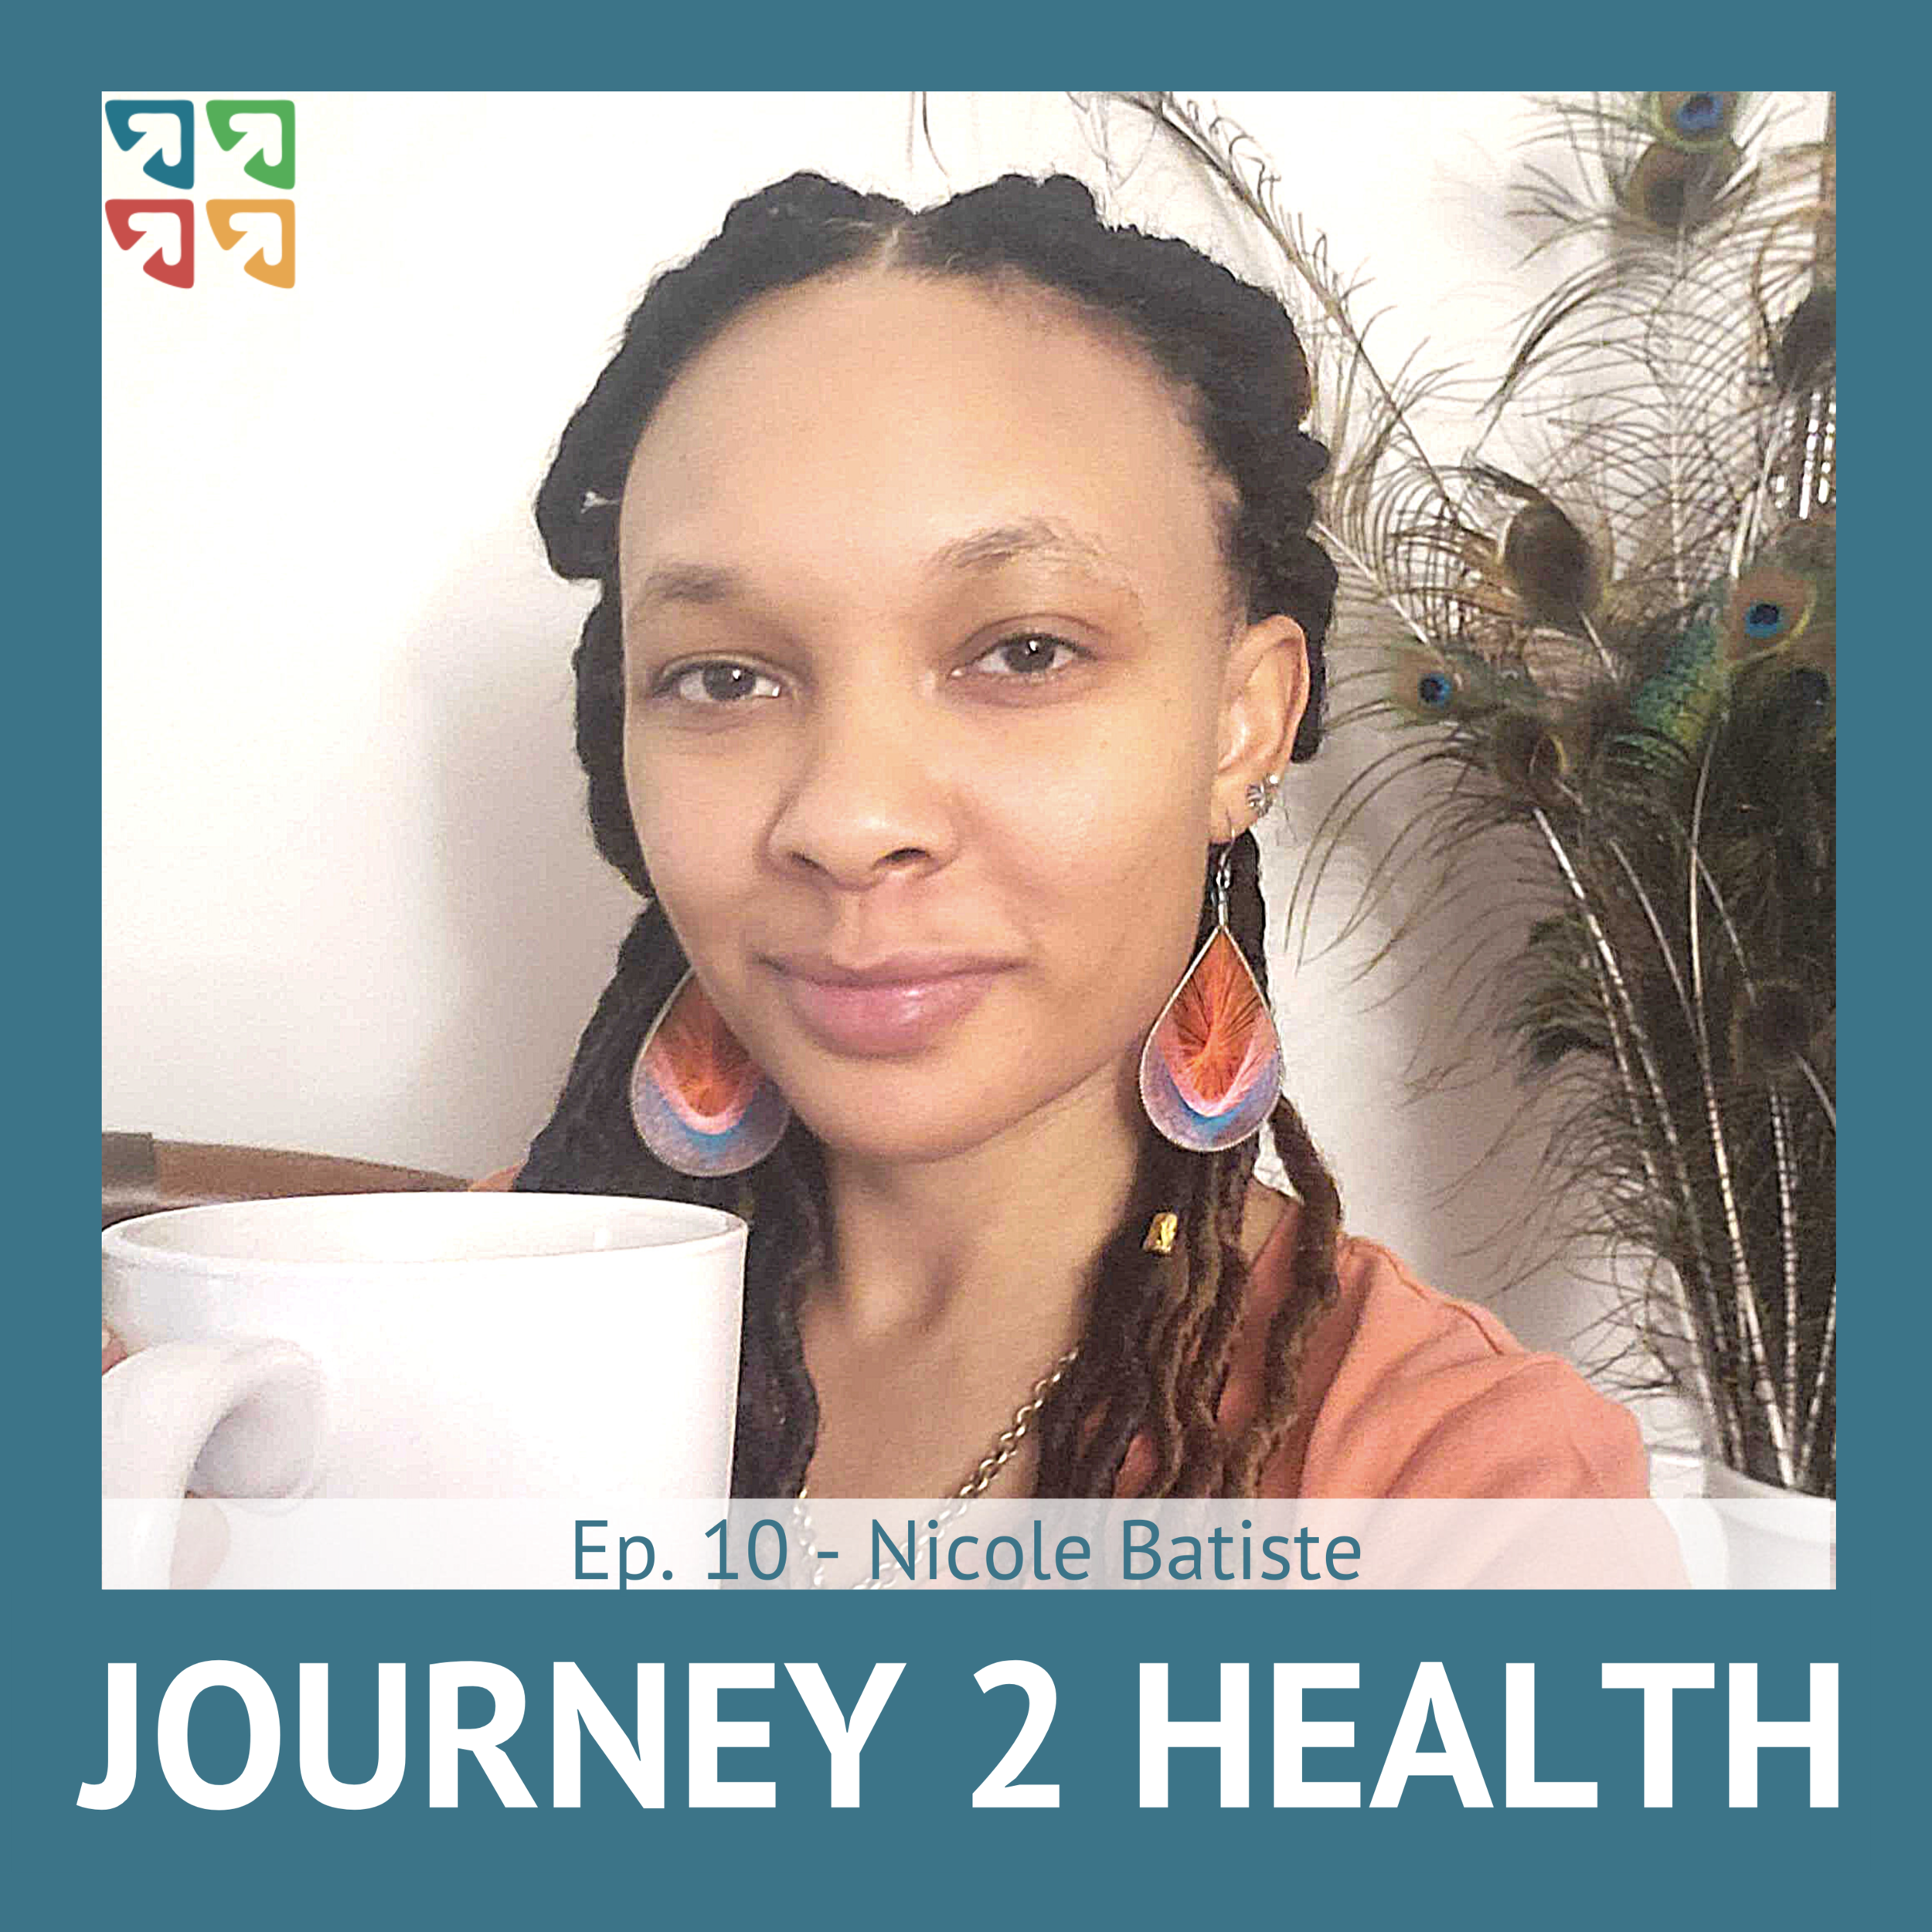 Battle of the Mind - Nicole courageously shares her story of childhood trauma that continued through adulthood.  Yet. the toxic relationship she found the most healing with was the one she had with herself.